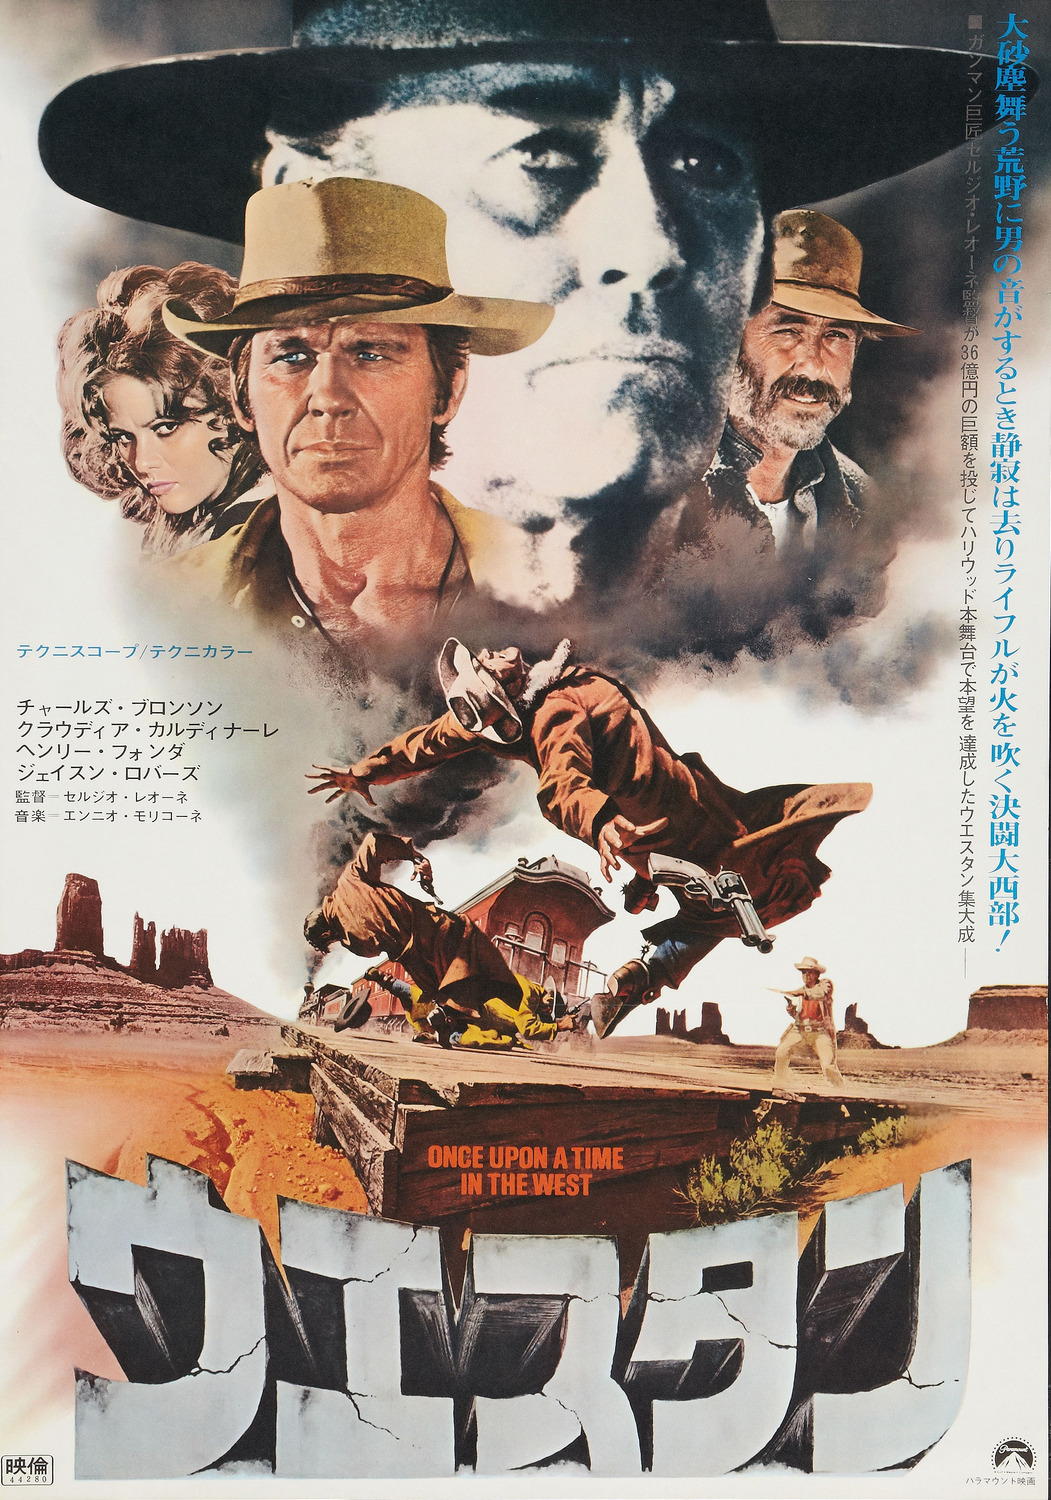 Extra Large Movie Poster Image for Once Upon a Time in the West (#2 of 3)